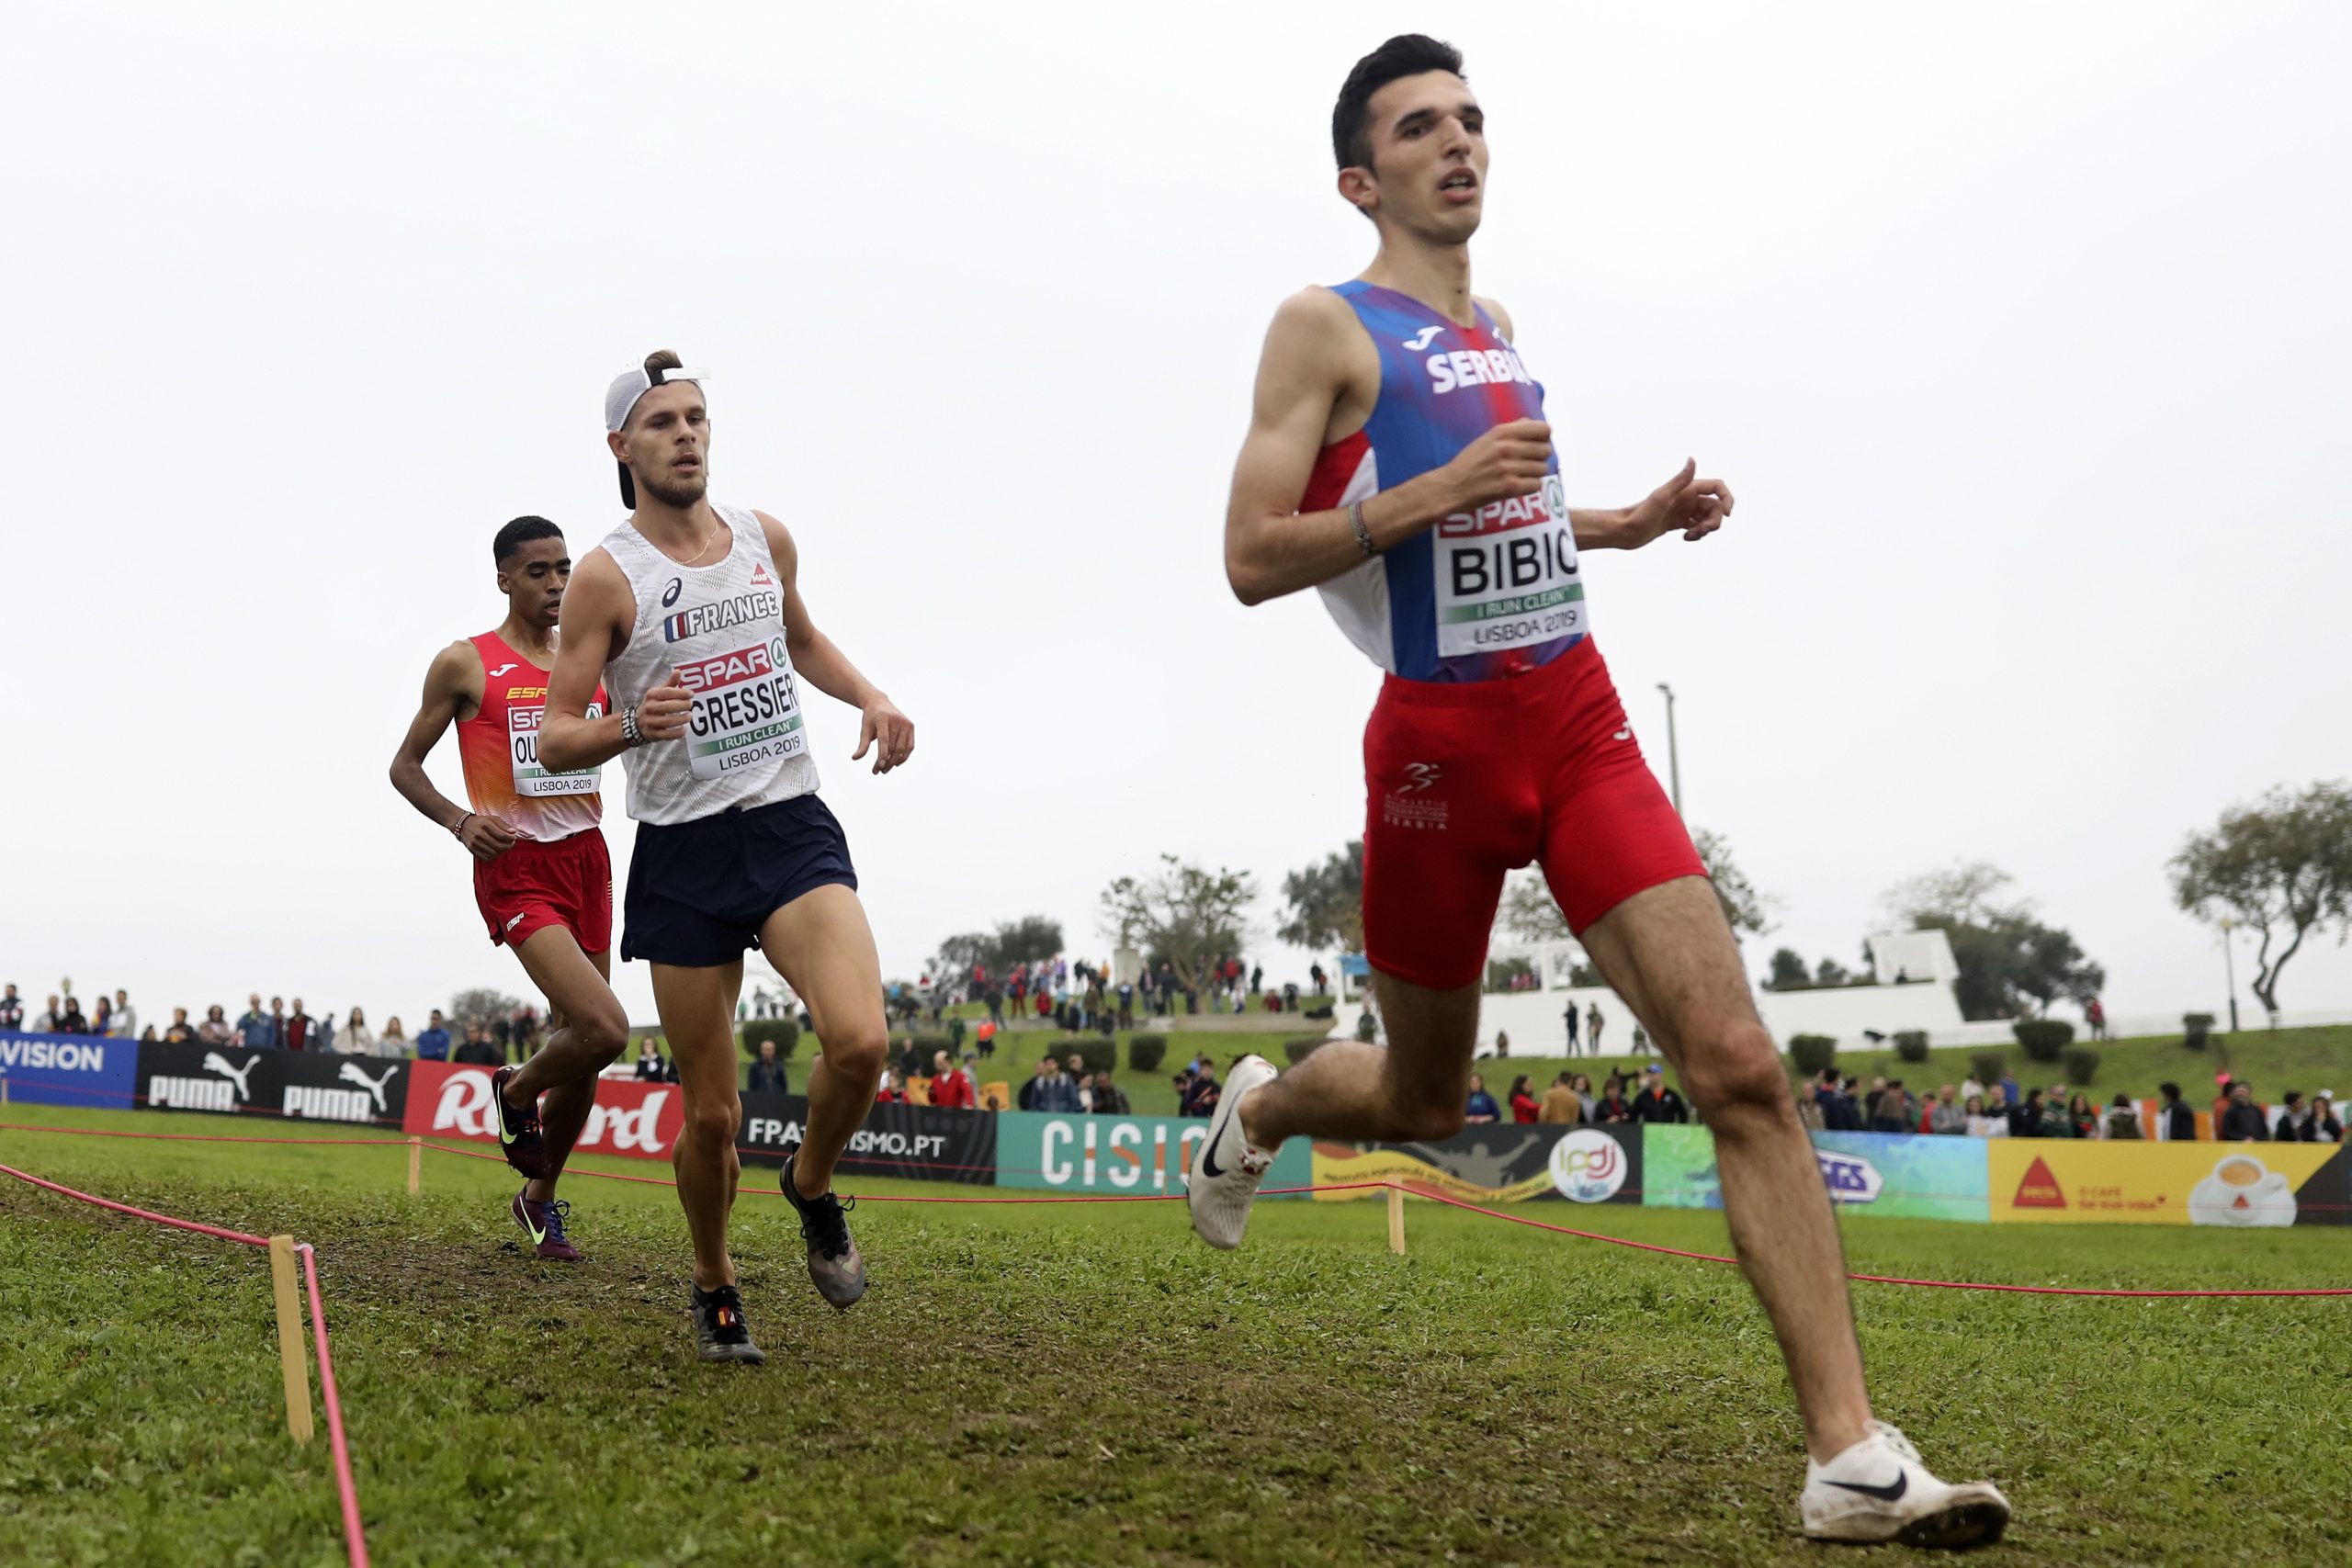 Bronze medalist Abdessamad Oukhelfen of Spain, gold medalist Jimmy Gressier of France and silver medalist Ellen Bibic of Serbia, from left to right, compete in the Under 23 Men's race during the European Cross Country Championships at the Bela Vista park in Lisbon, Sunday, Dec. 8, 2019. (AP Photo/Pedro Rocha)